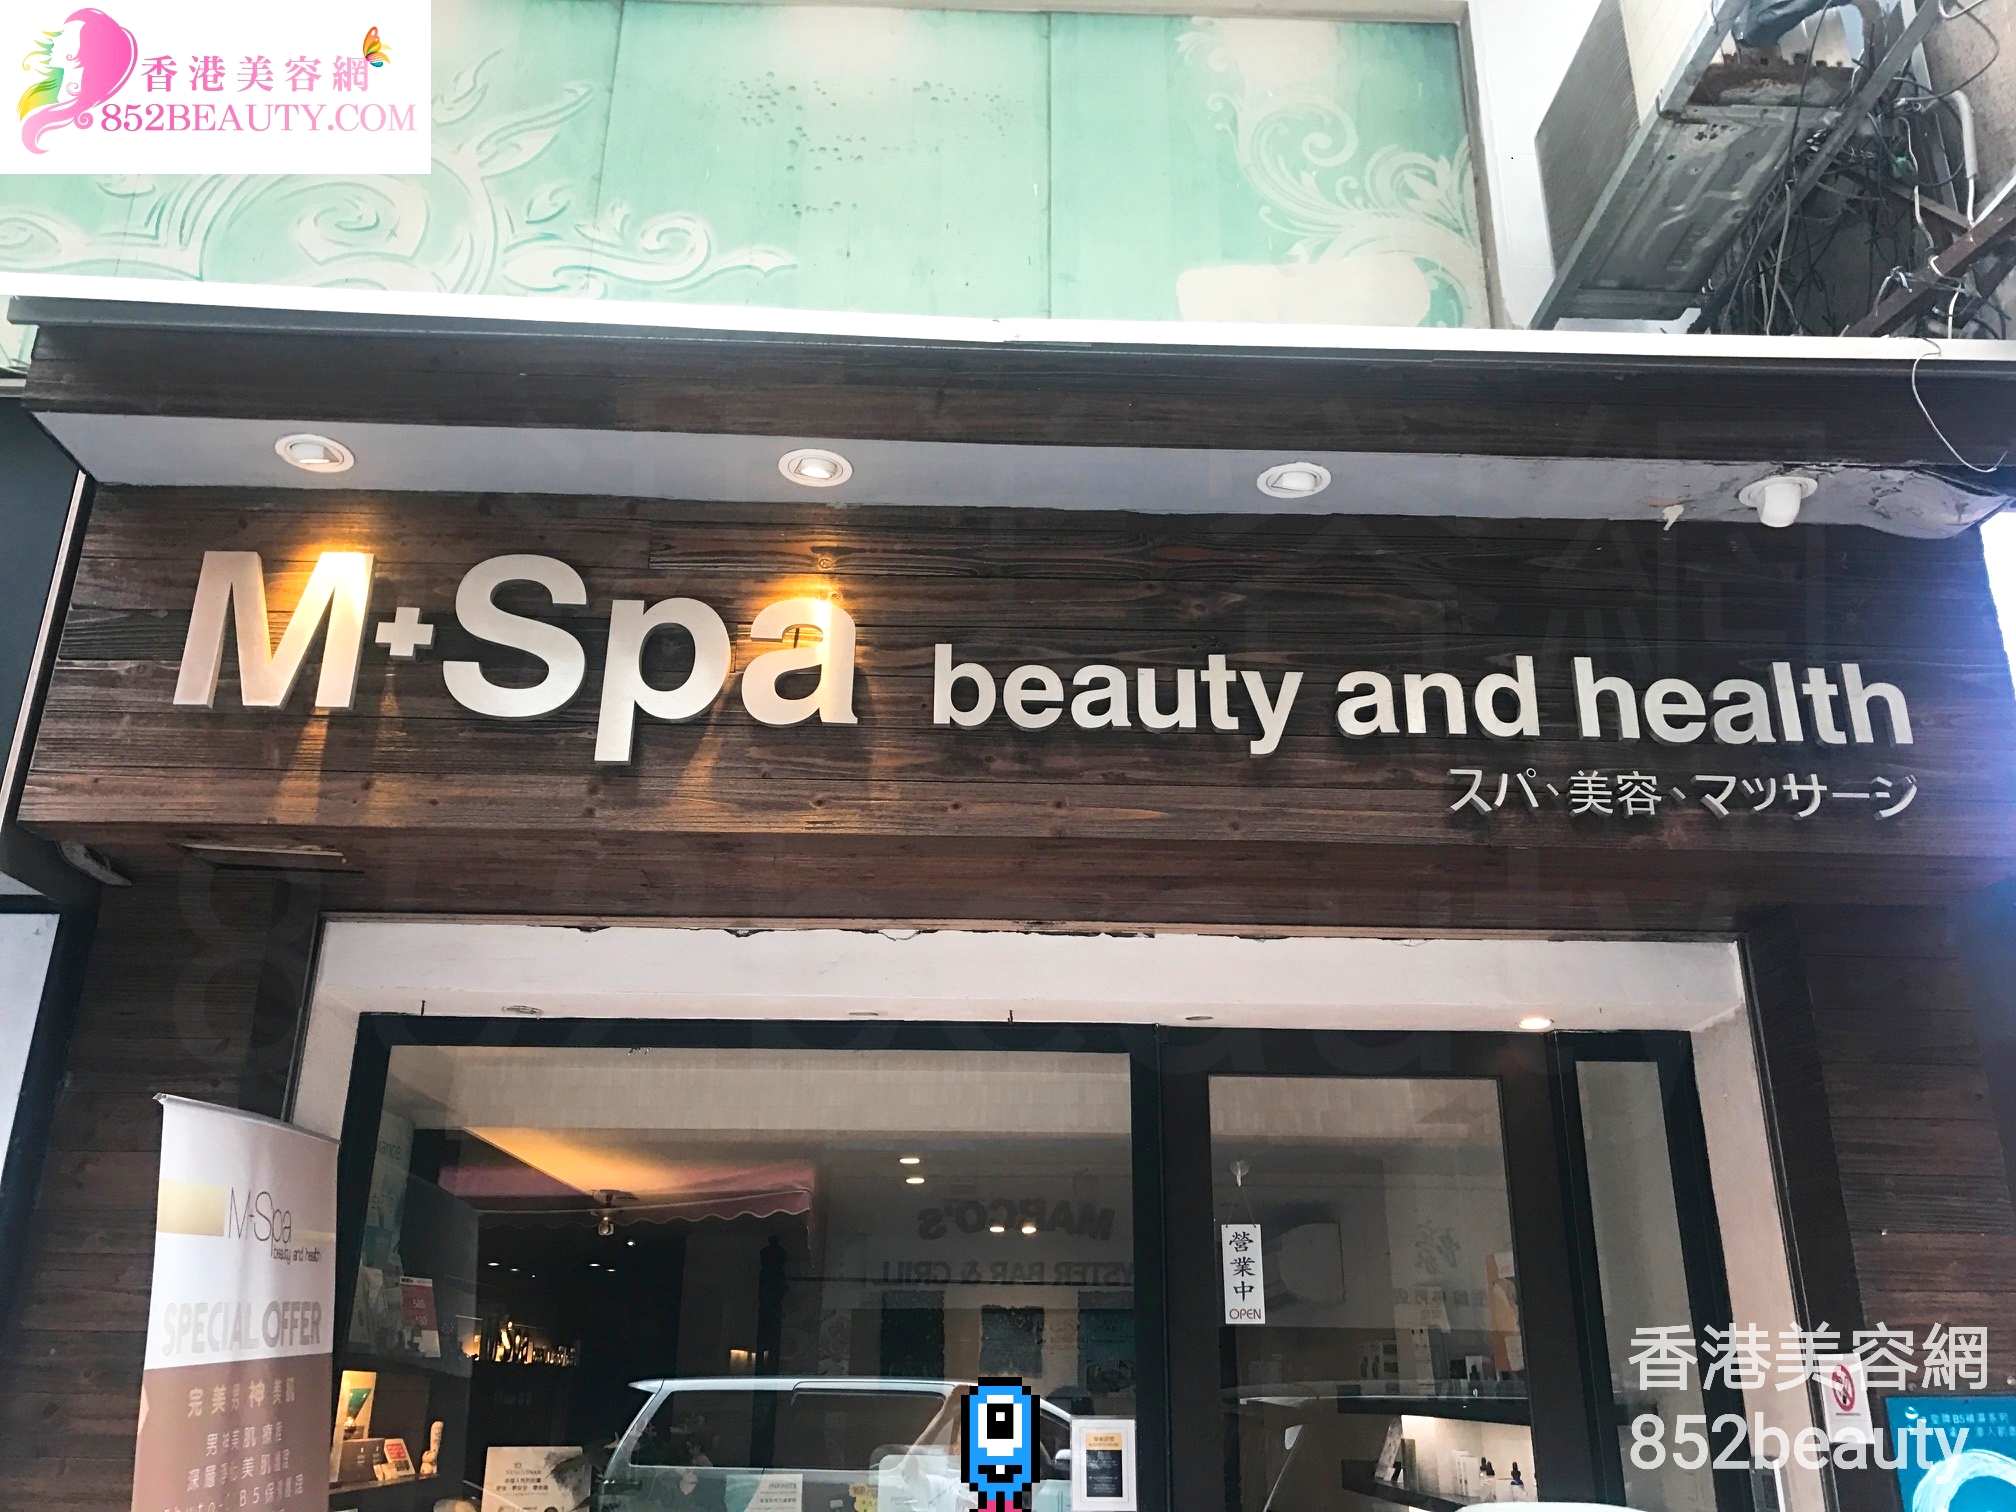 Slimming: M+Spa beauty and health